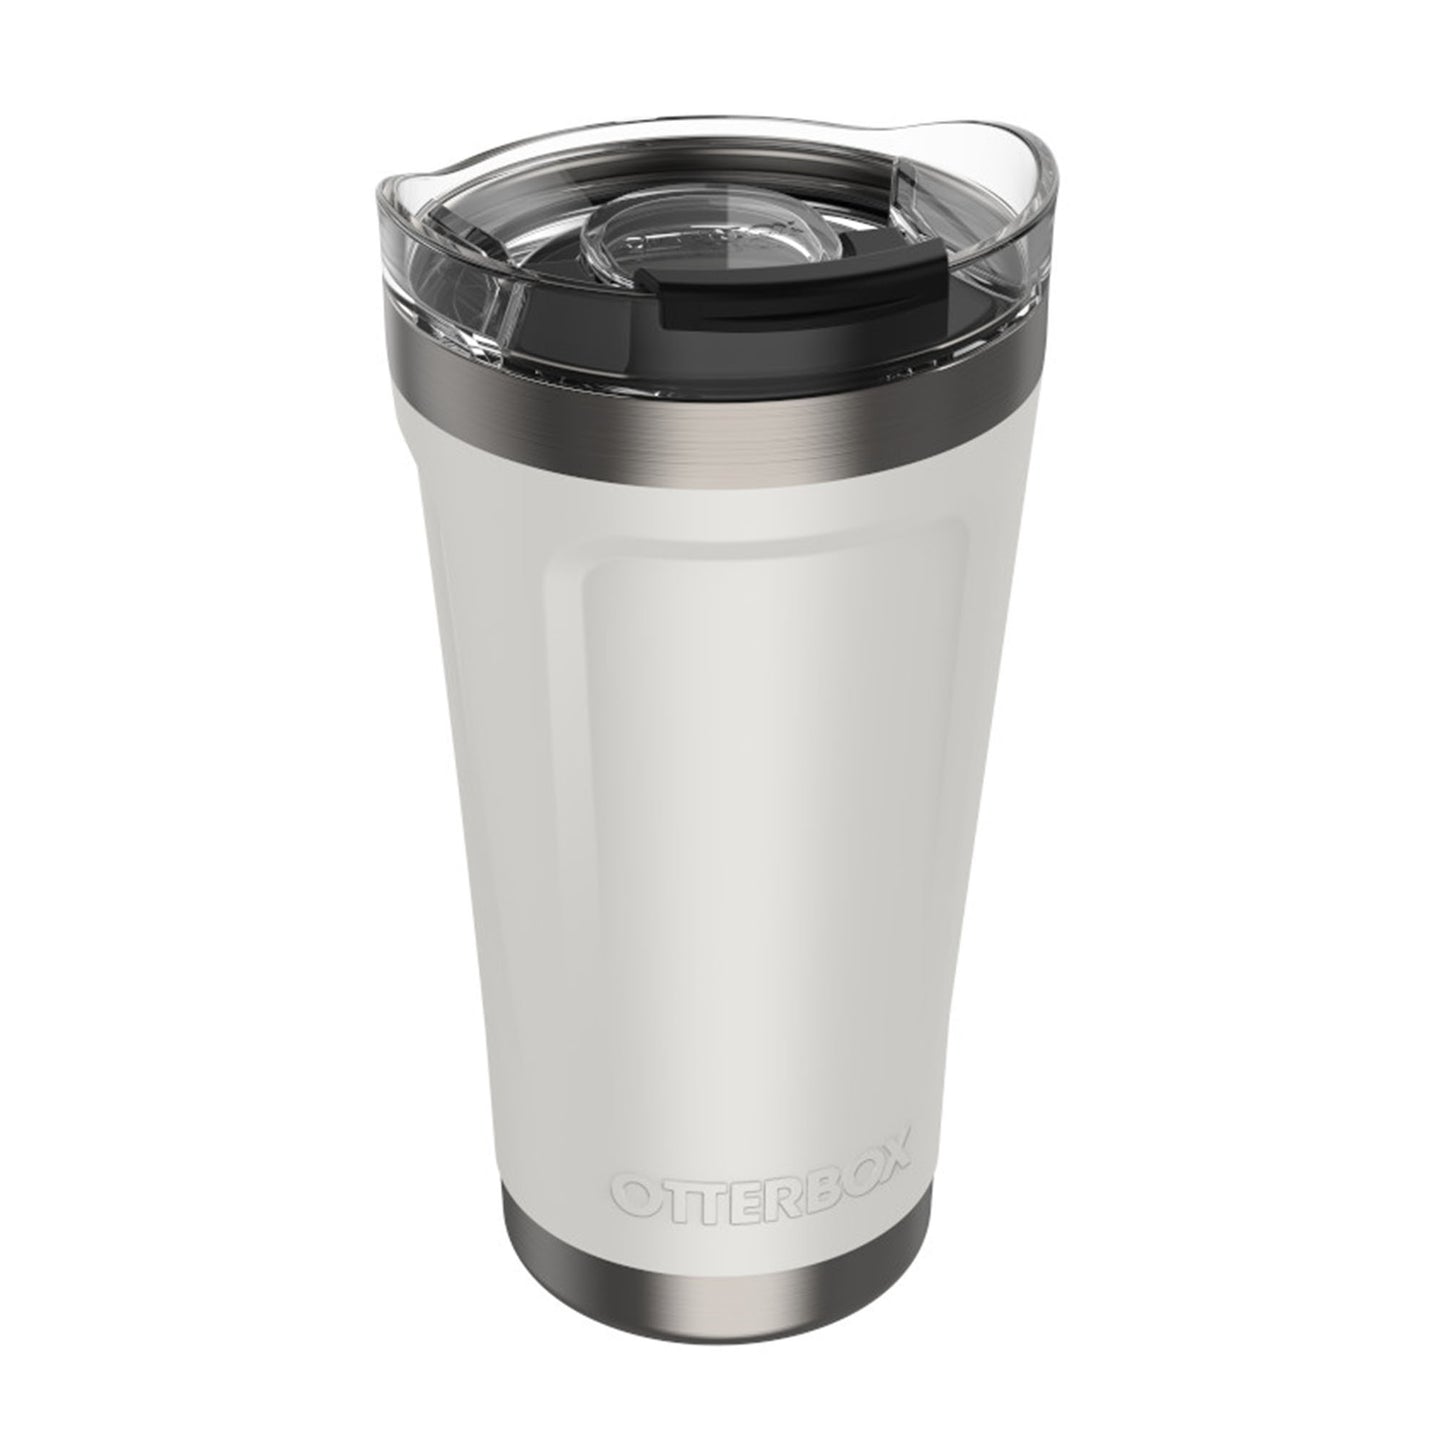 Otterbox Stainless Steel White/Silver (Ice Cap) Elevation 16oz Tumbler w/ Closed Lid - 15-06769